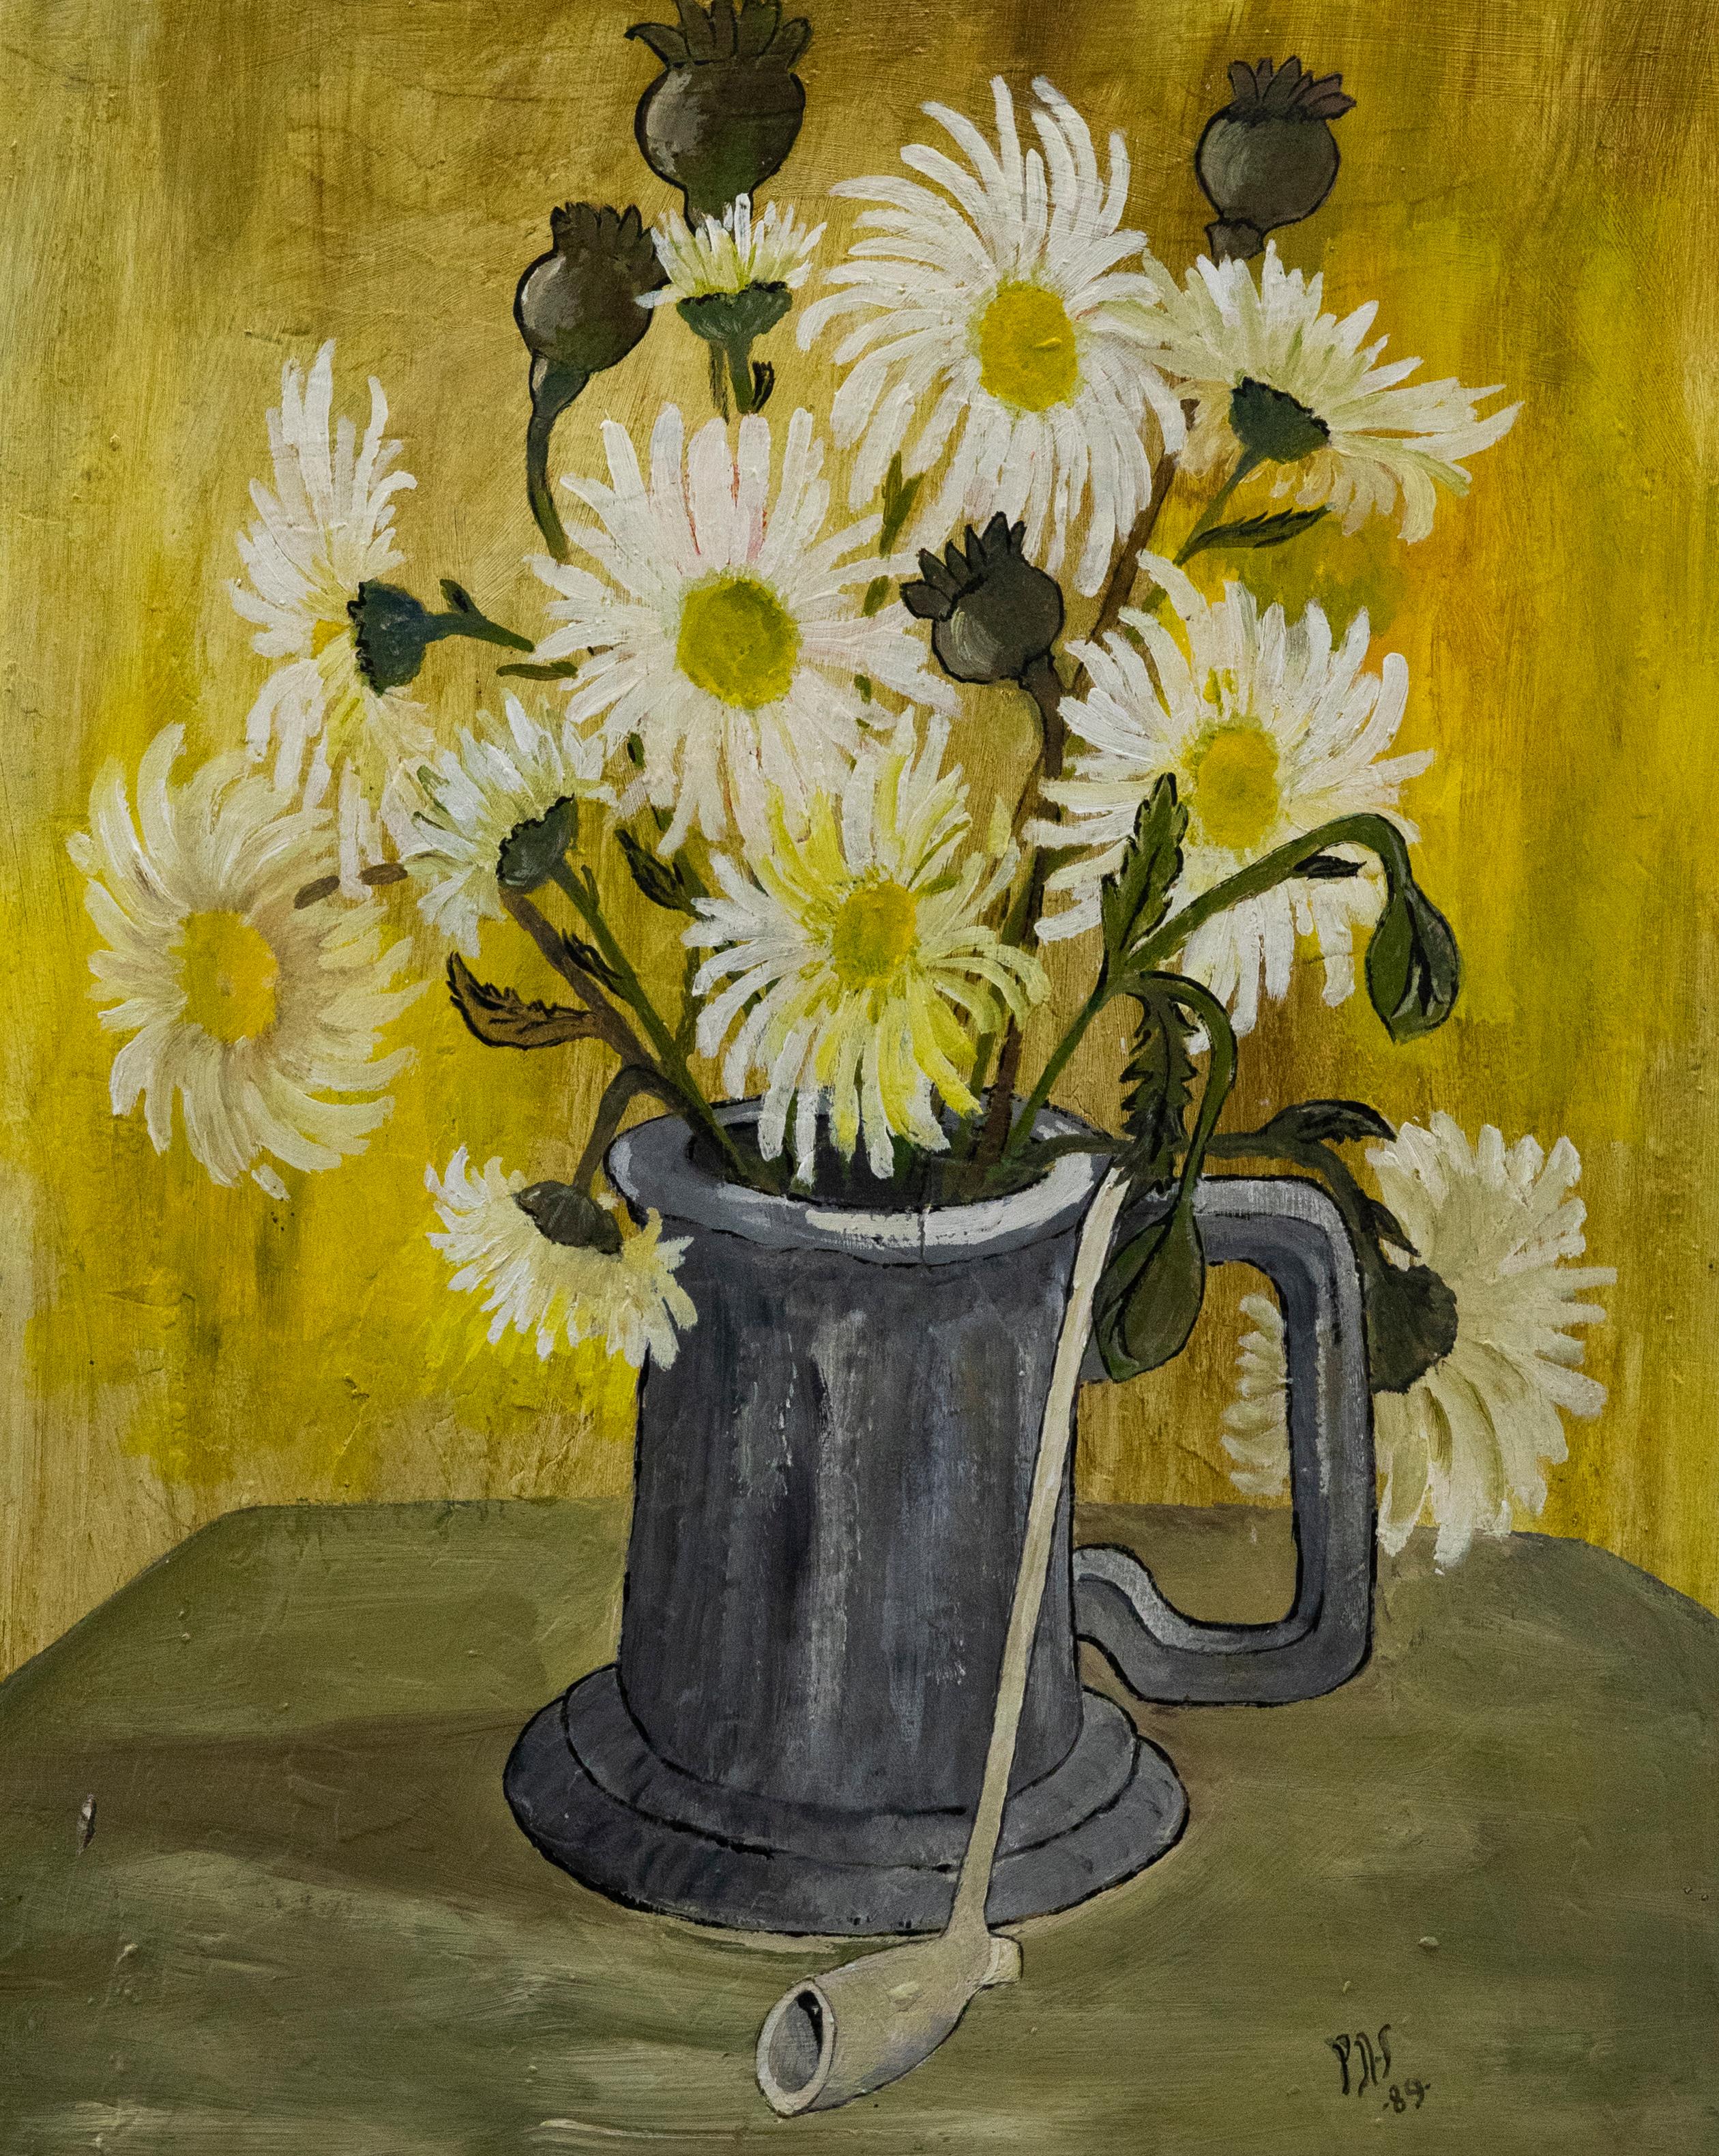 Unknown Still-Life Painting - P. H. S.  - 1989 Oil, Chrysanthemums on Yellow